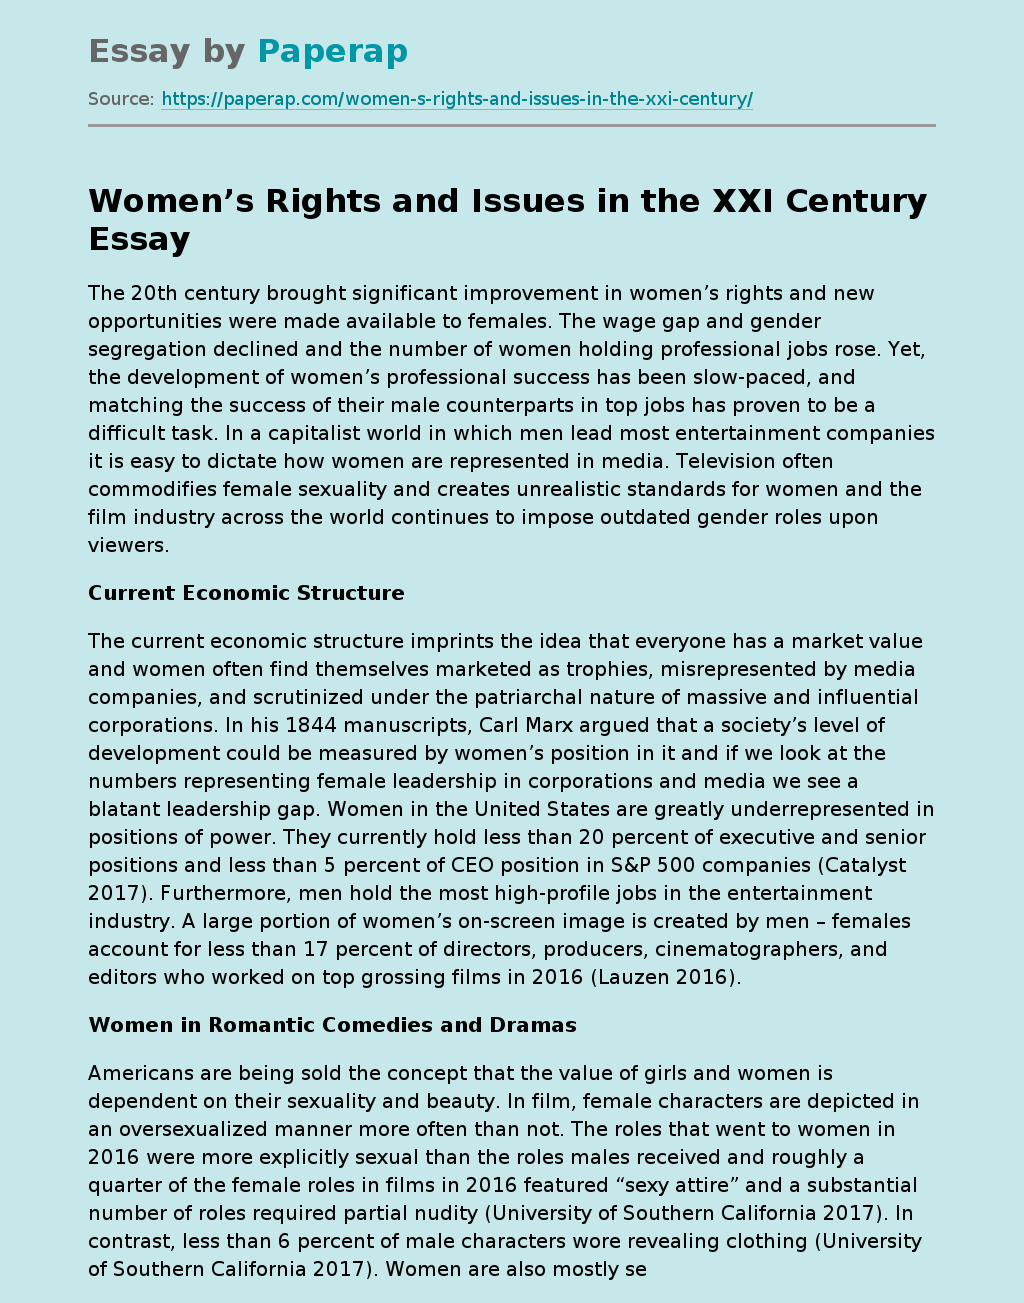 Women’s Rights and Issues in the XXI Century